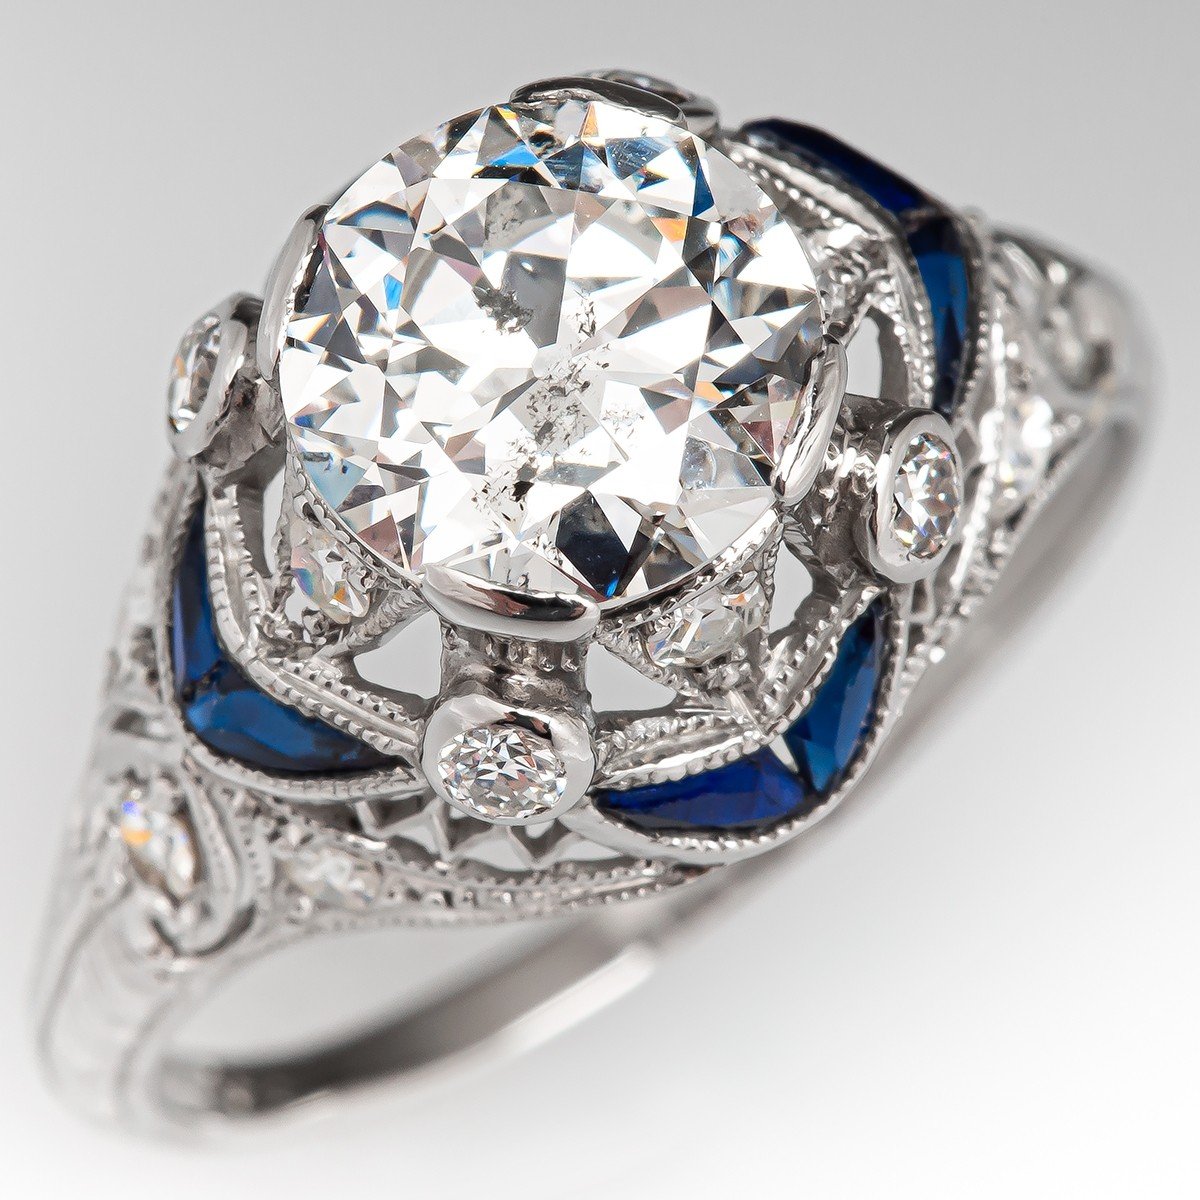 Detailed Antique 1920S Art Deco Diamond Engagement Ring W/Created Sapphires  1.55Ct G/I1 Gia